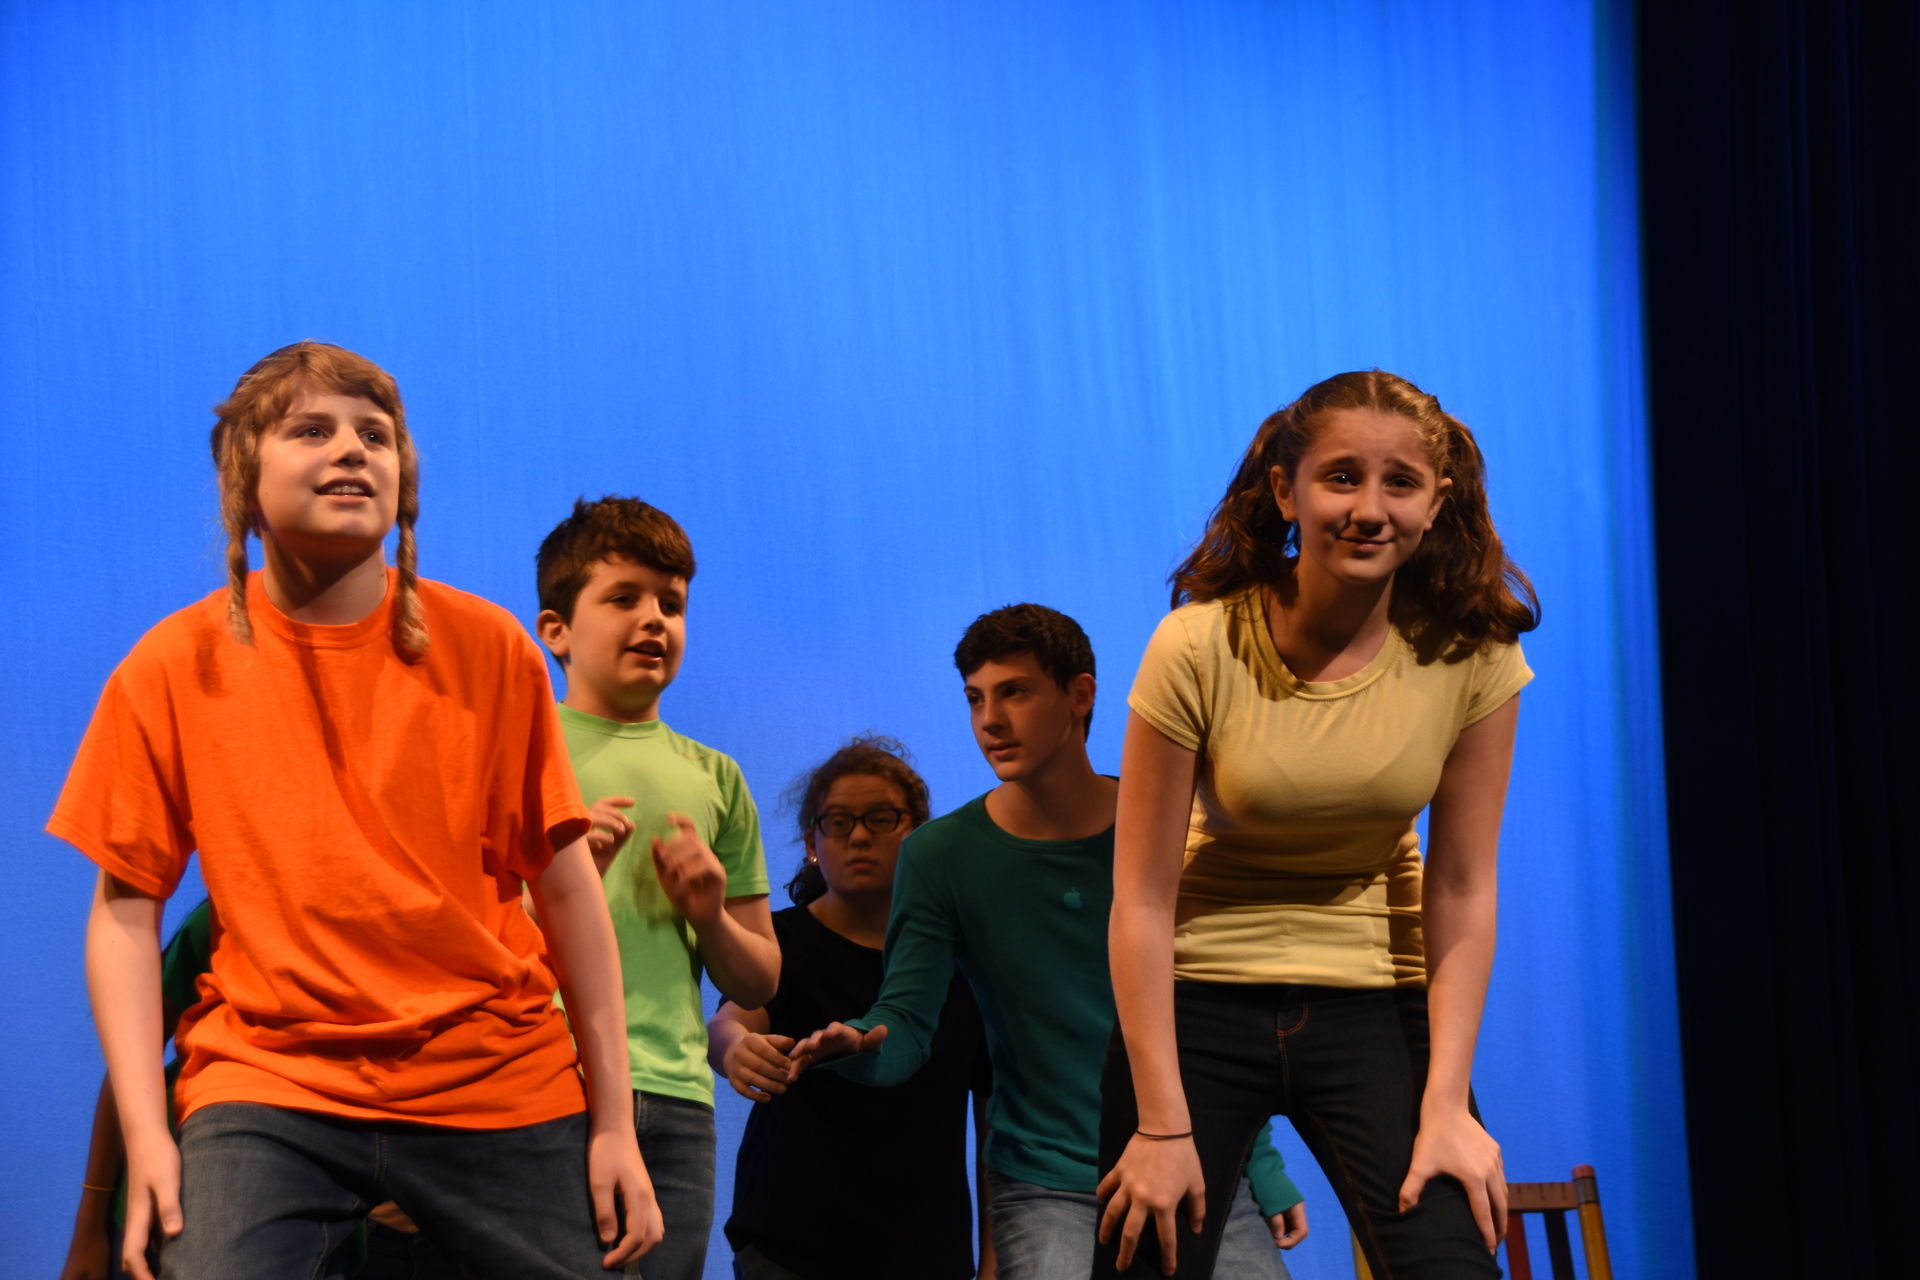 Children on stage with moody lighting.